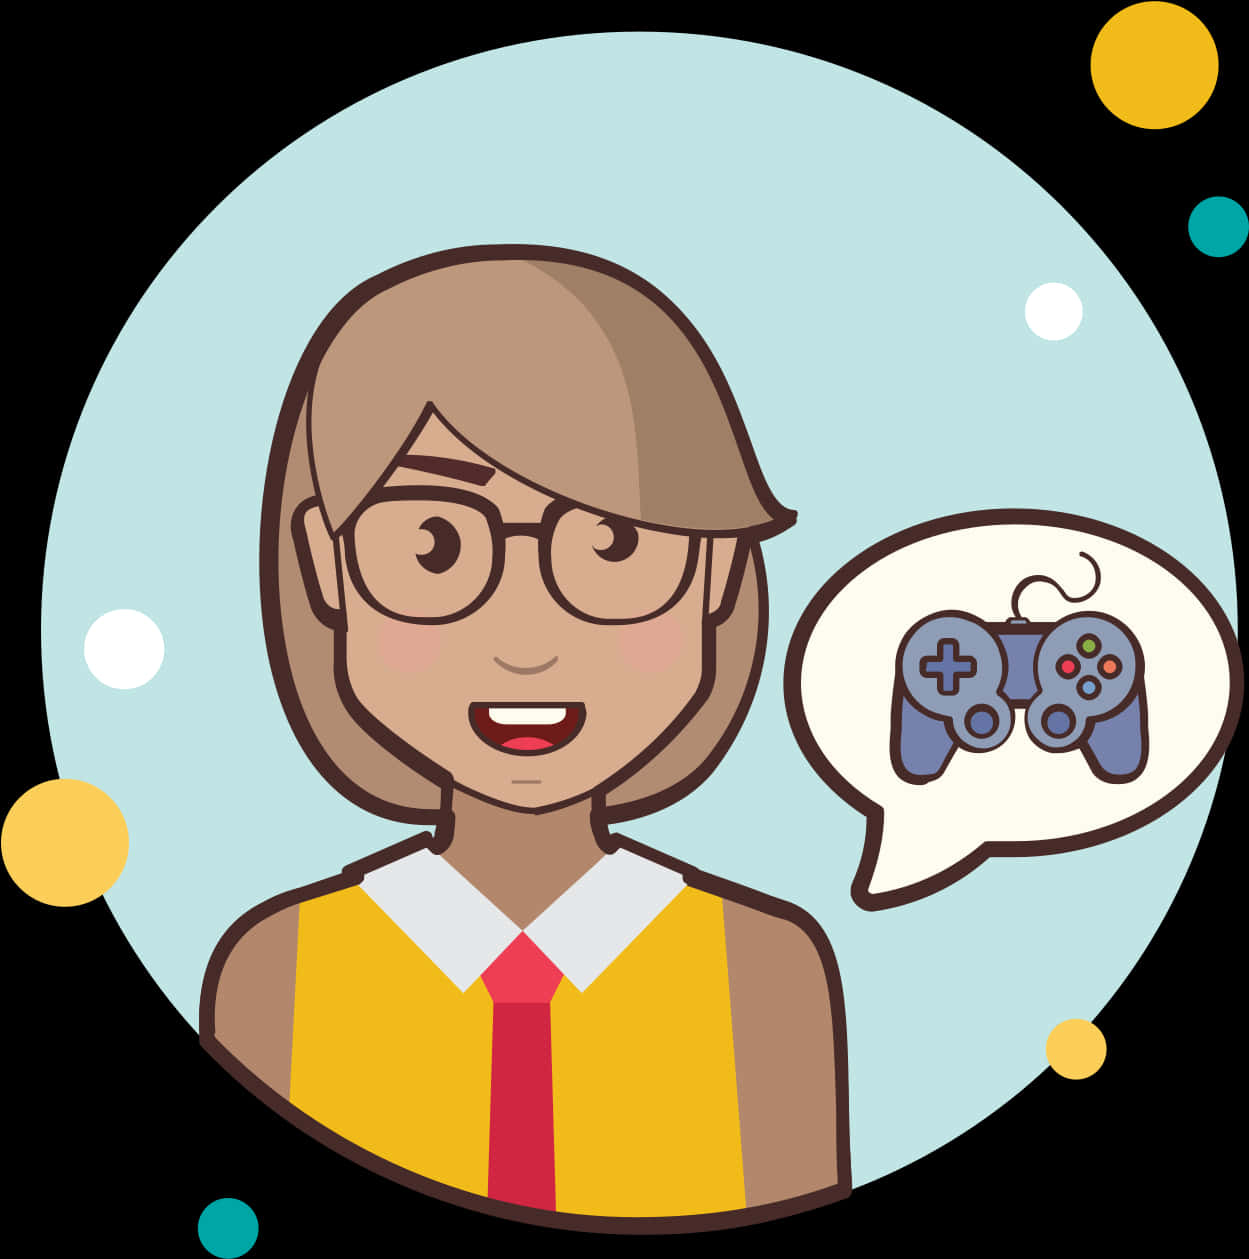 A Cartoon Of A Woman With Glasses And A Game Controller